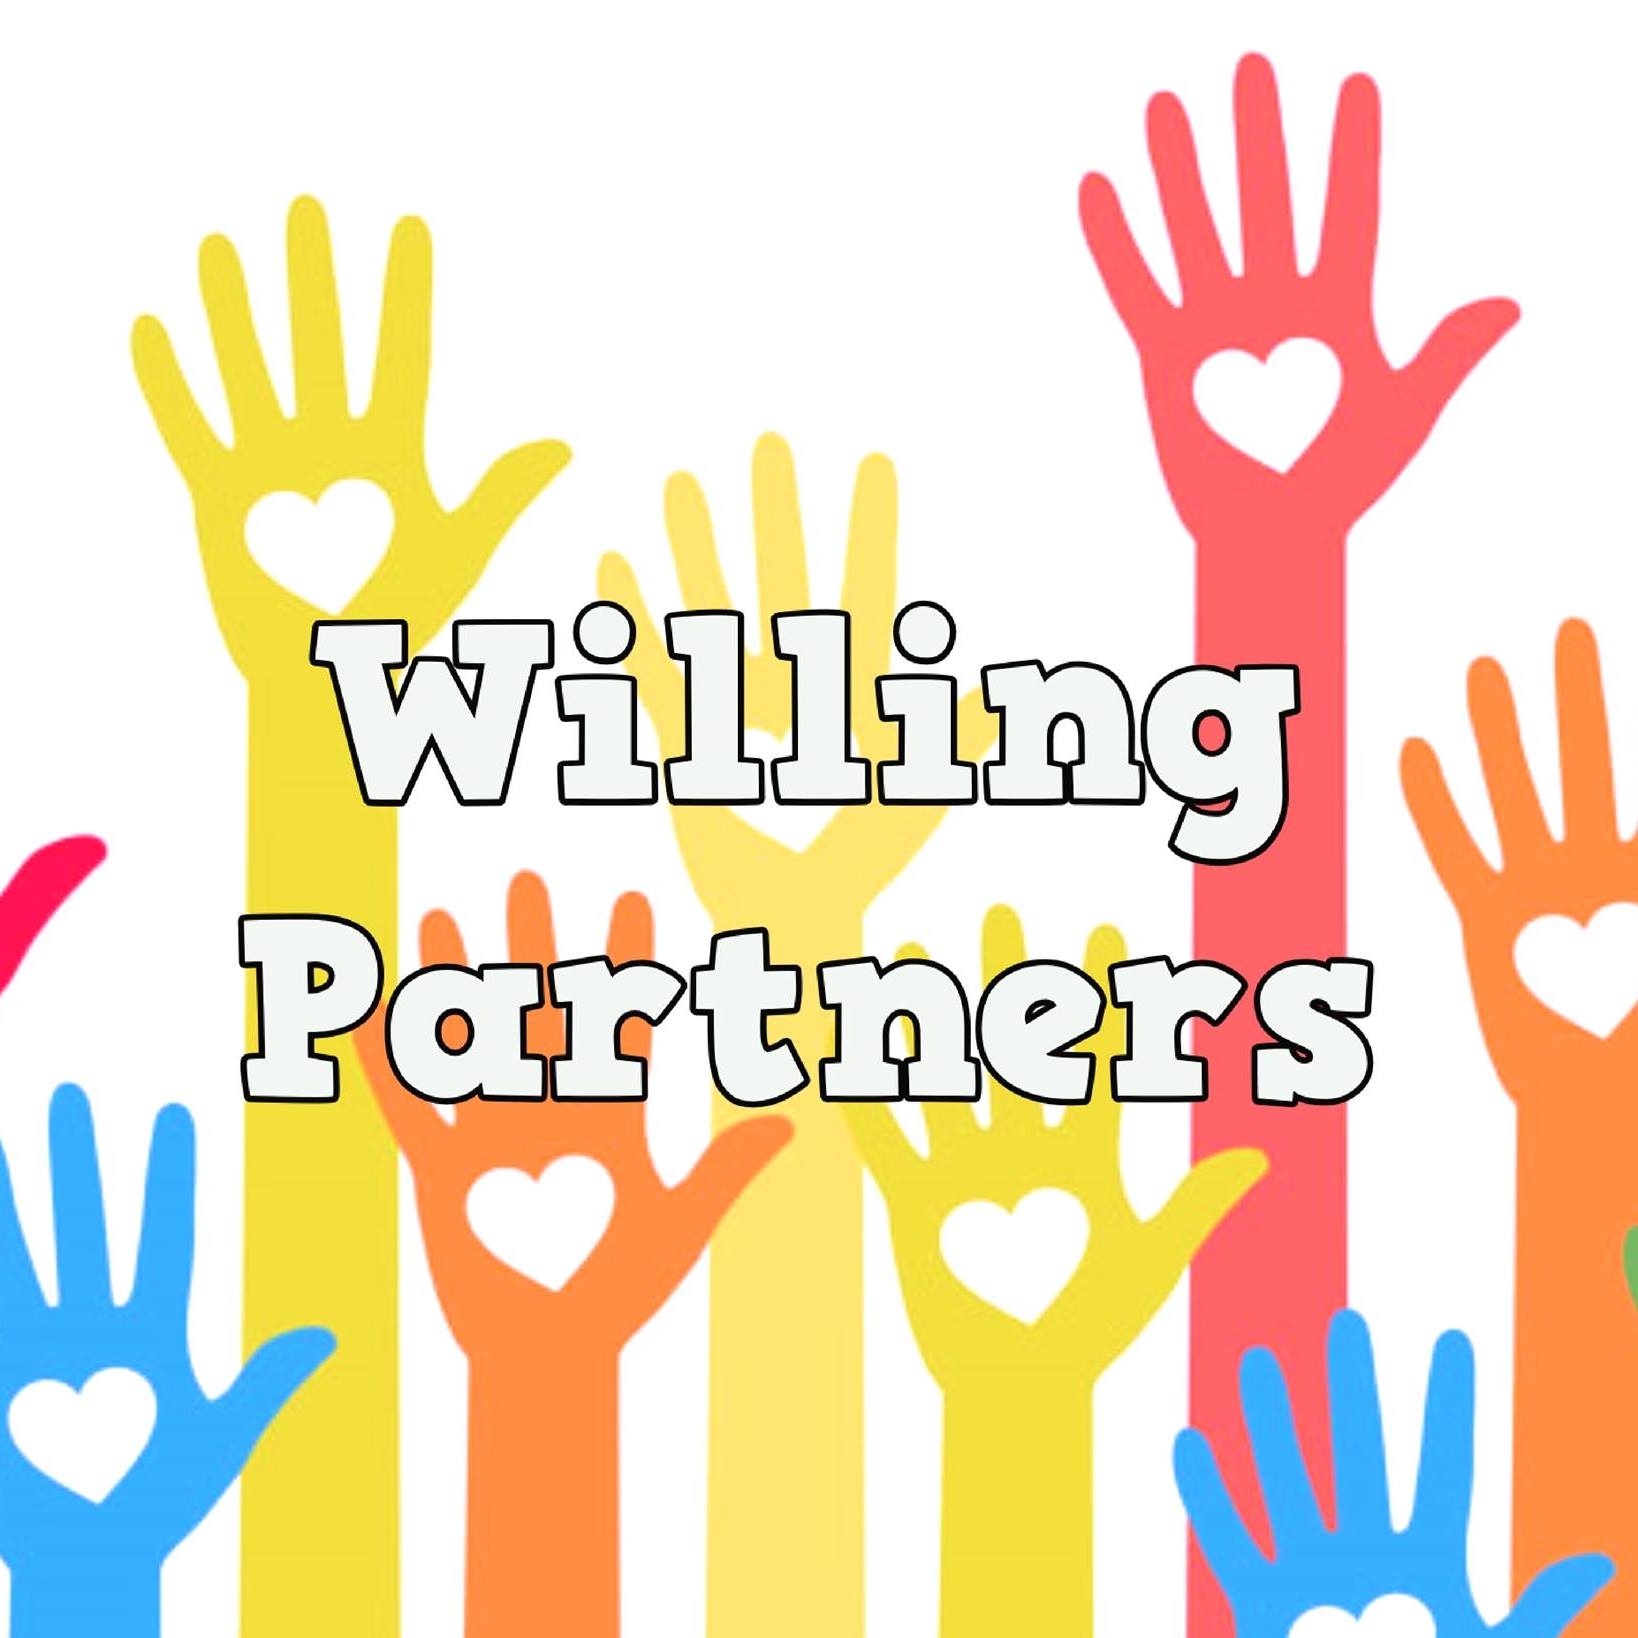 Willing Partners